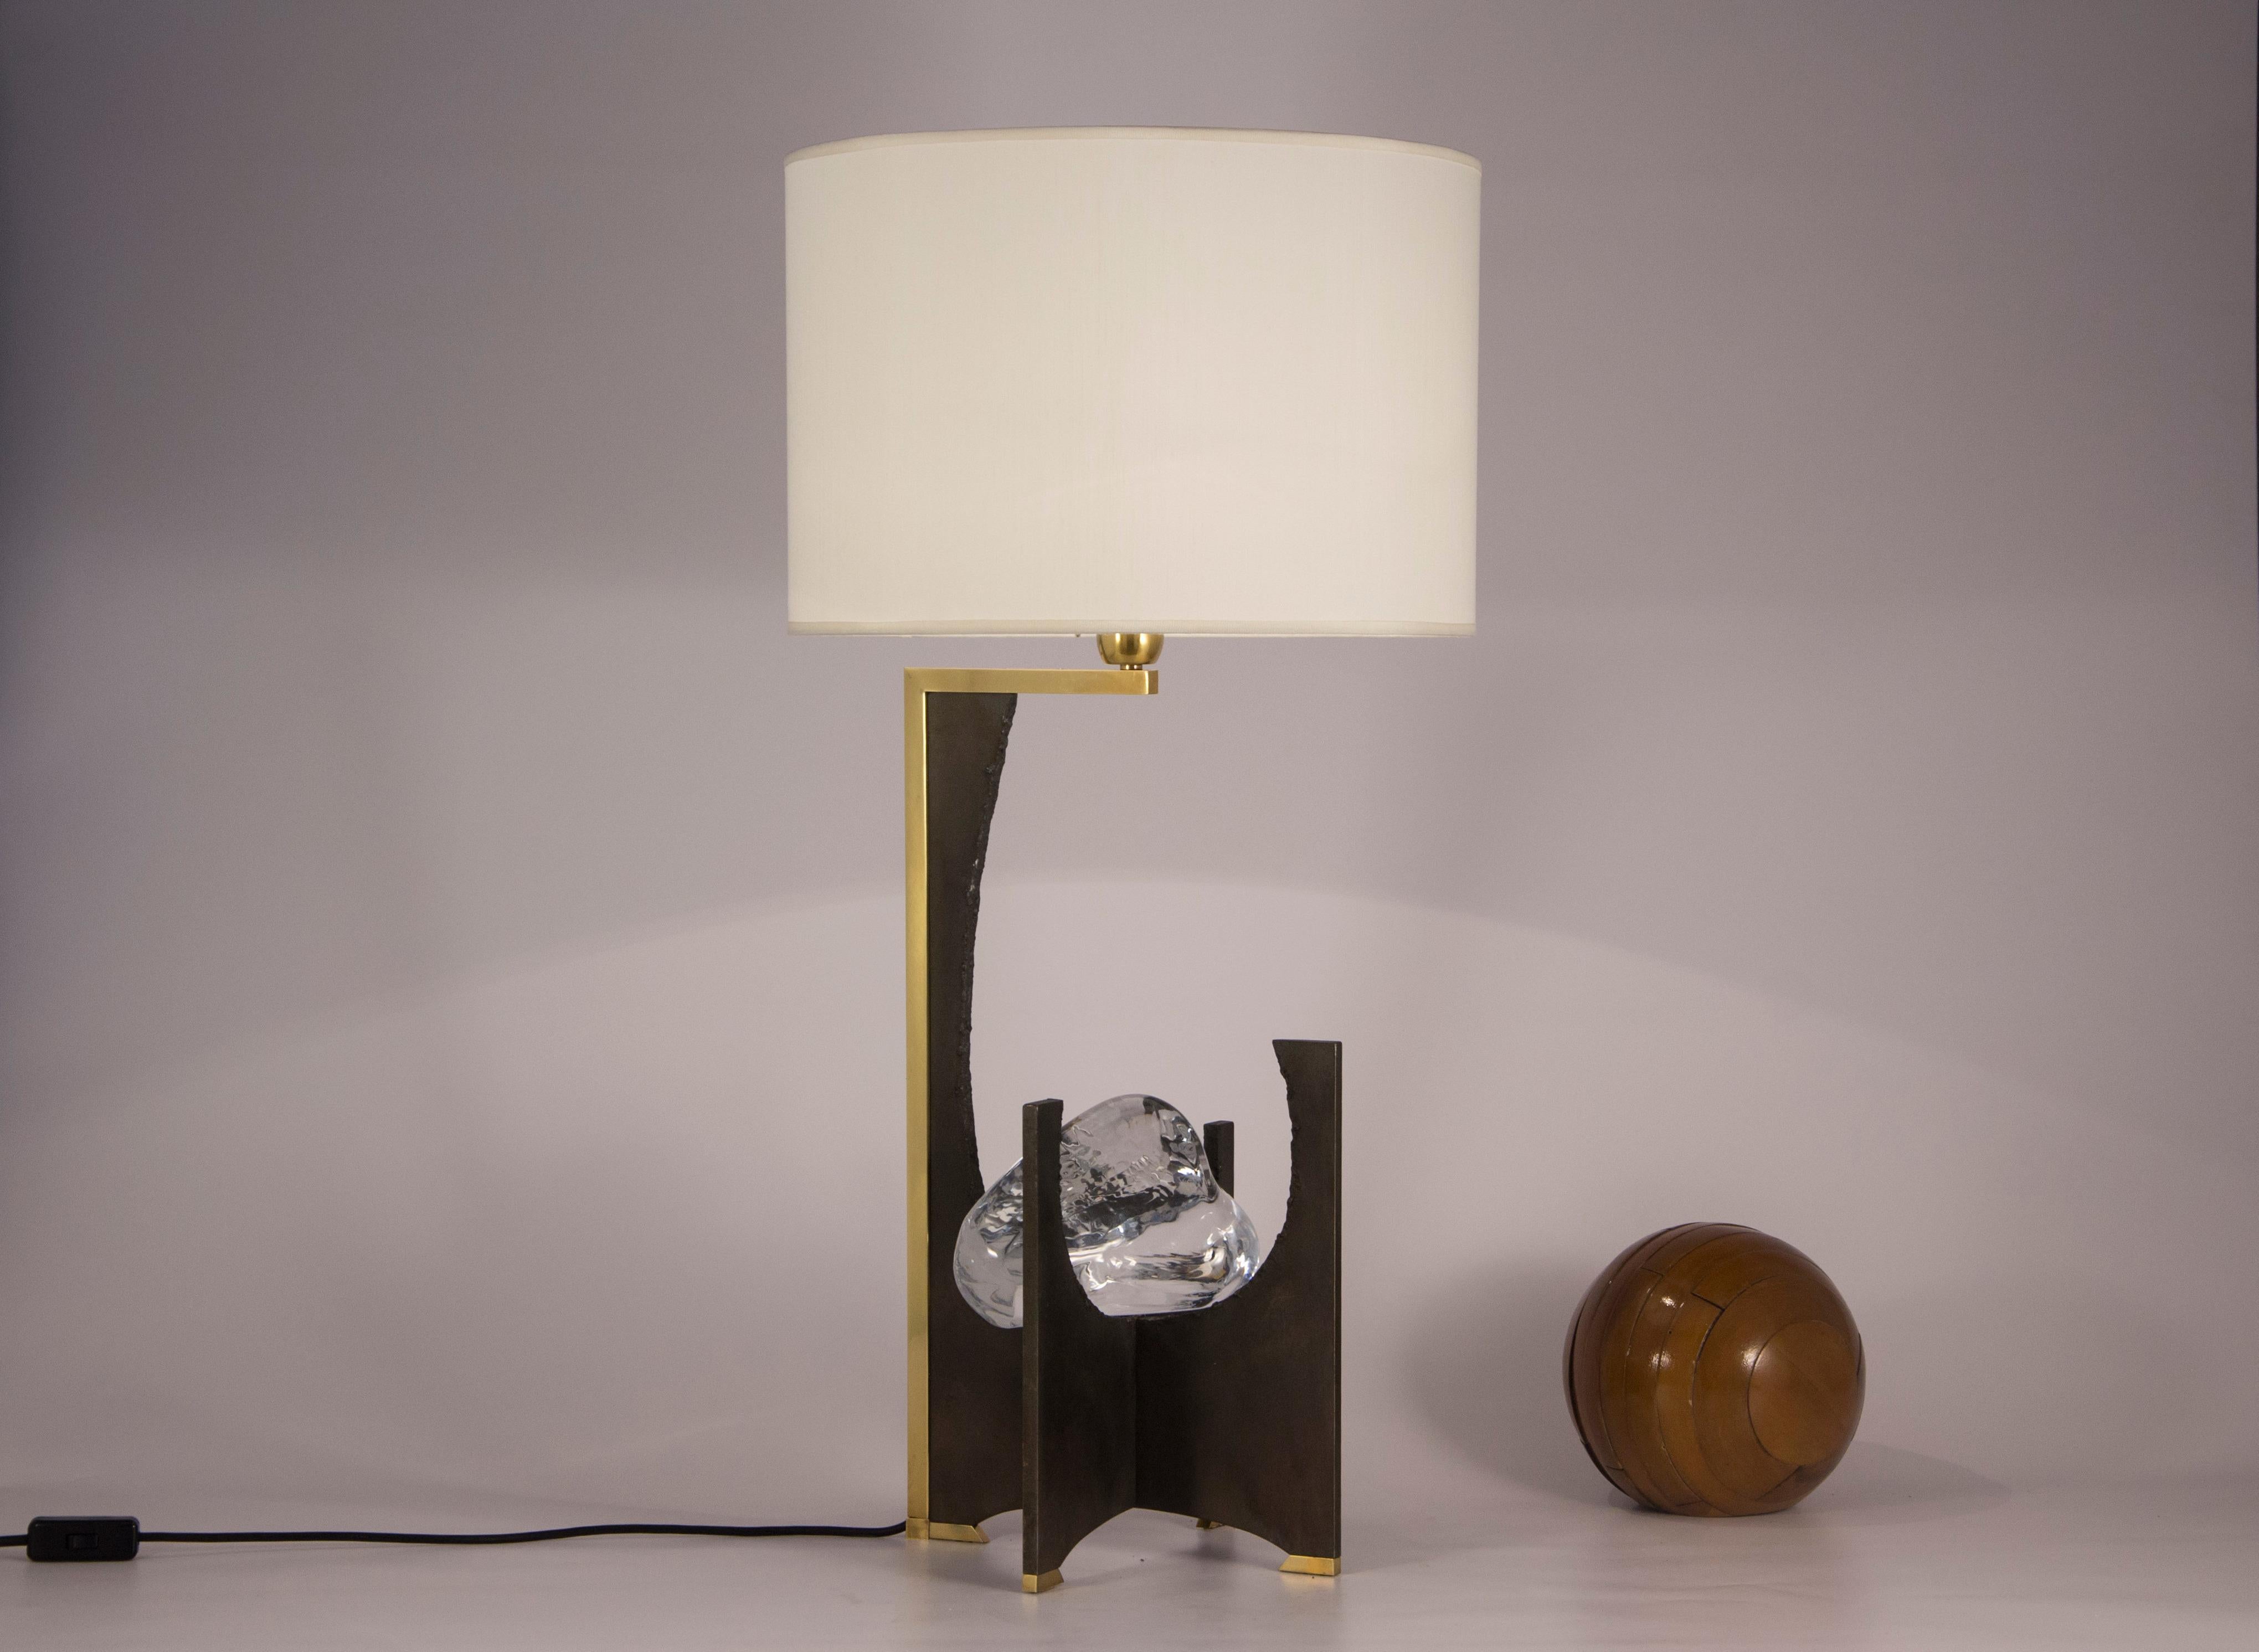 Table lamp with iron structure with natural waxed iron finish. The details of the base and the central body are in slightly burnished brass. In the center there is an artistic crystal made by hand; circular lampshade in ivory colored shantung.